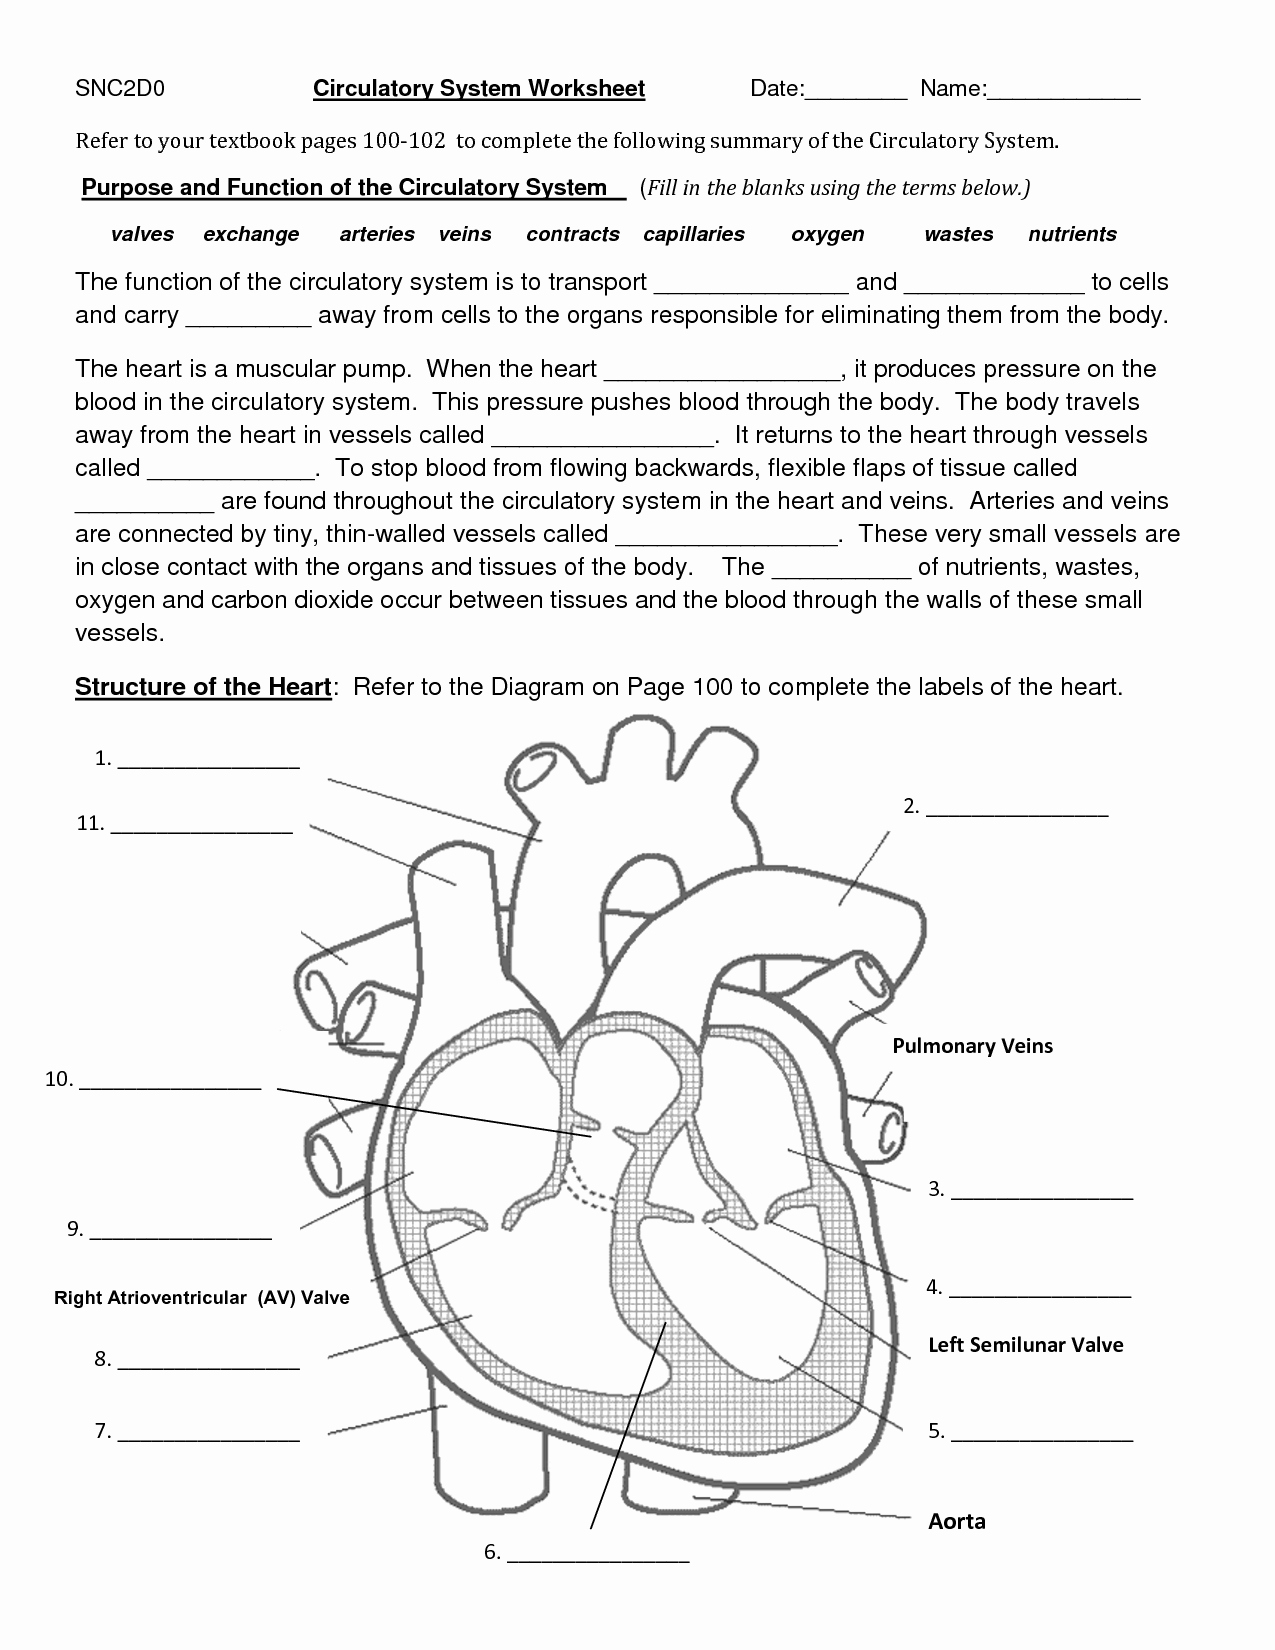 The Circulatory System Worksheet Answers Best Of 14 Best Of Blank Fill In the Circulatory System